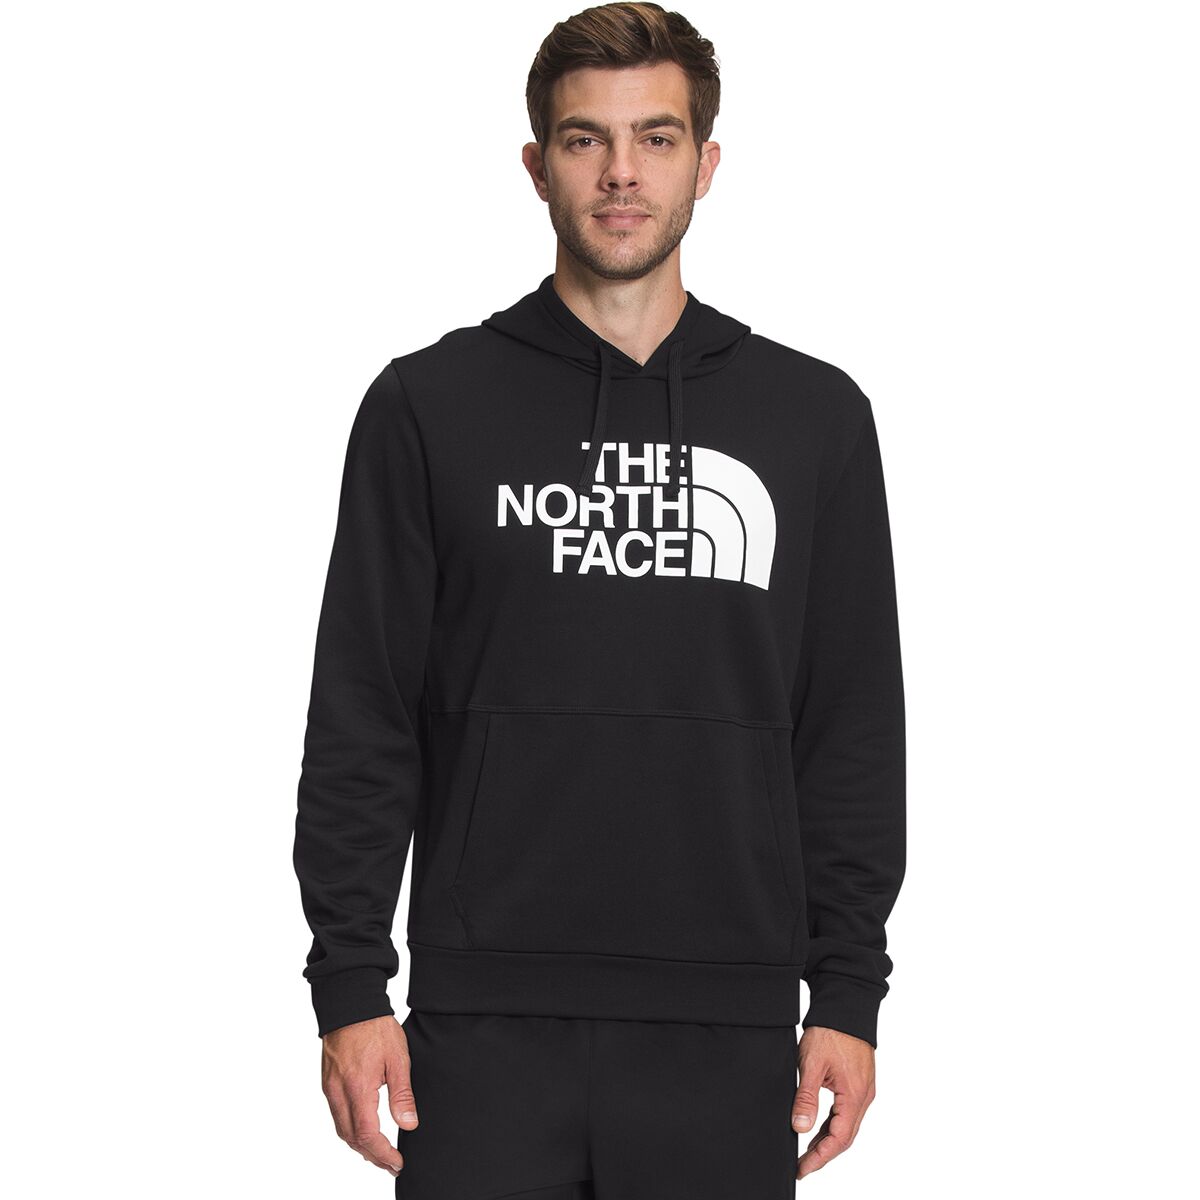 The North Face Exploration Pullover Hoodie - Men's